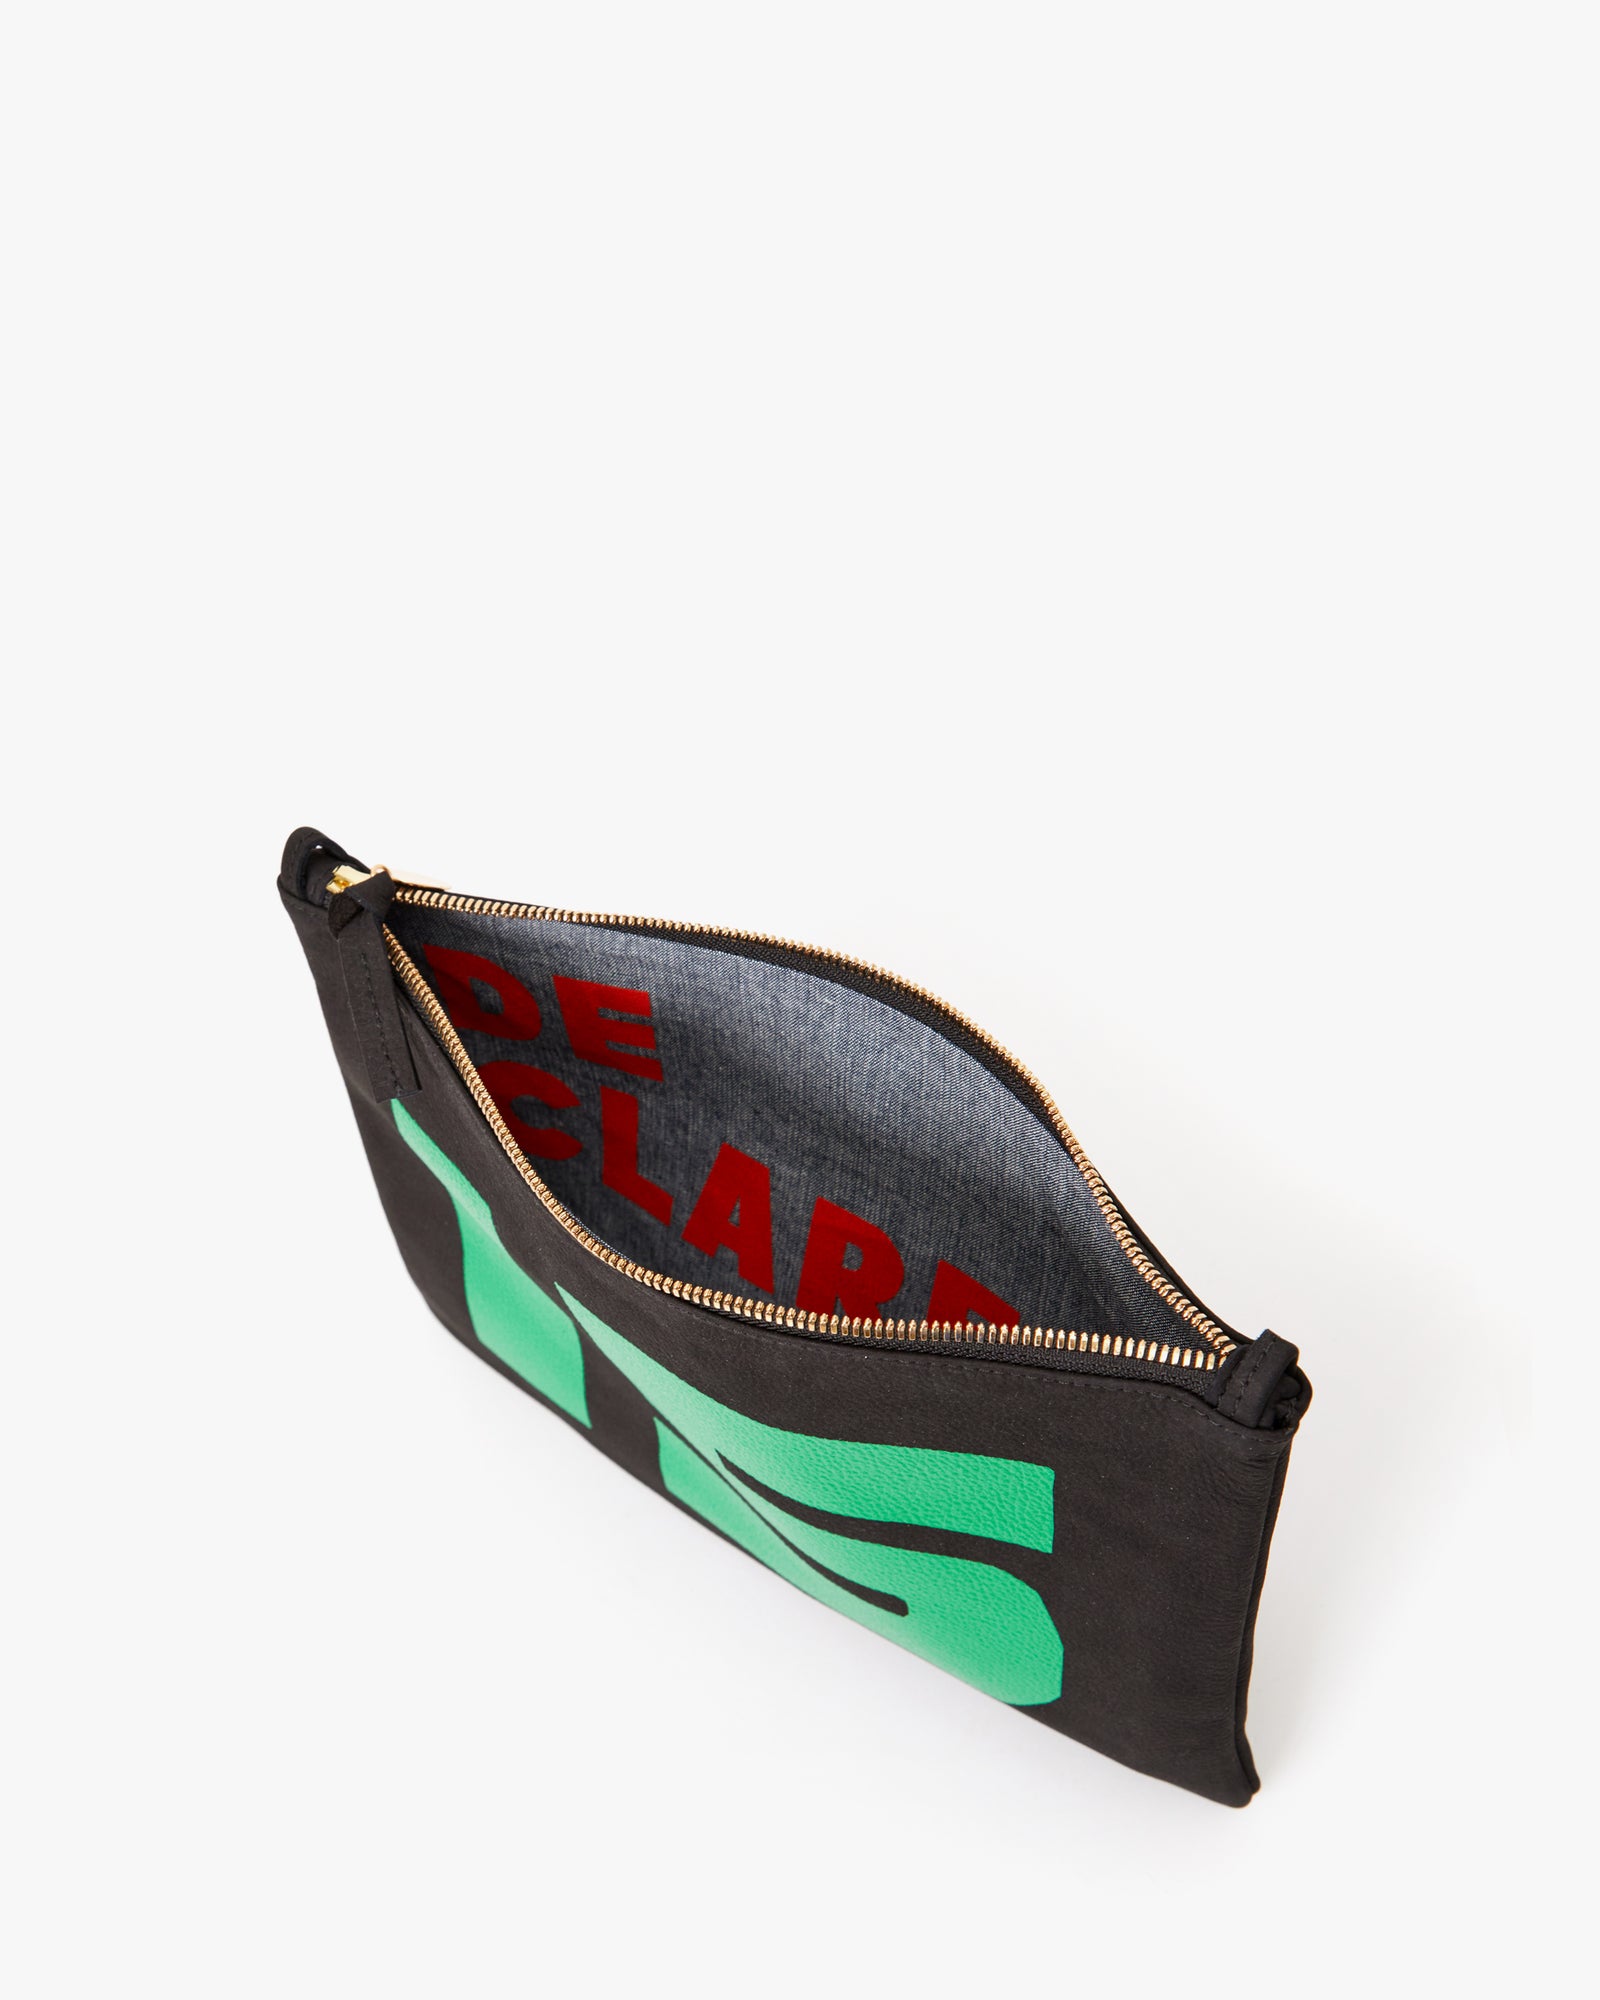 Clare V. Flat Clutch with Tabs